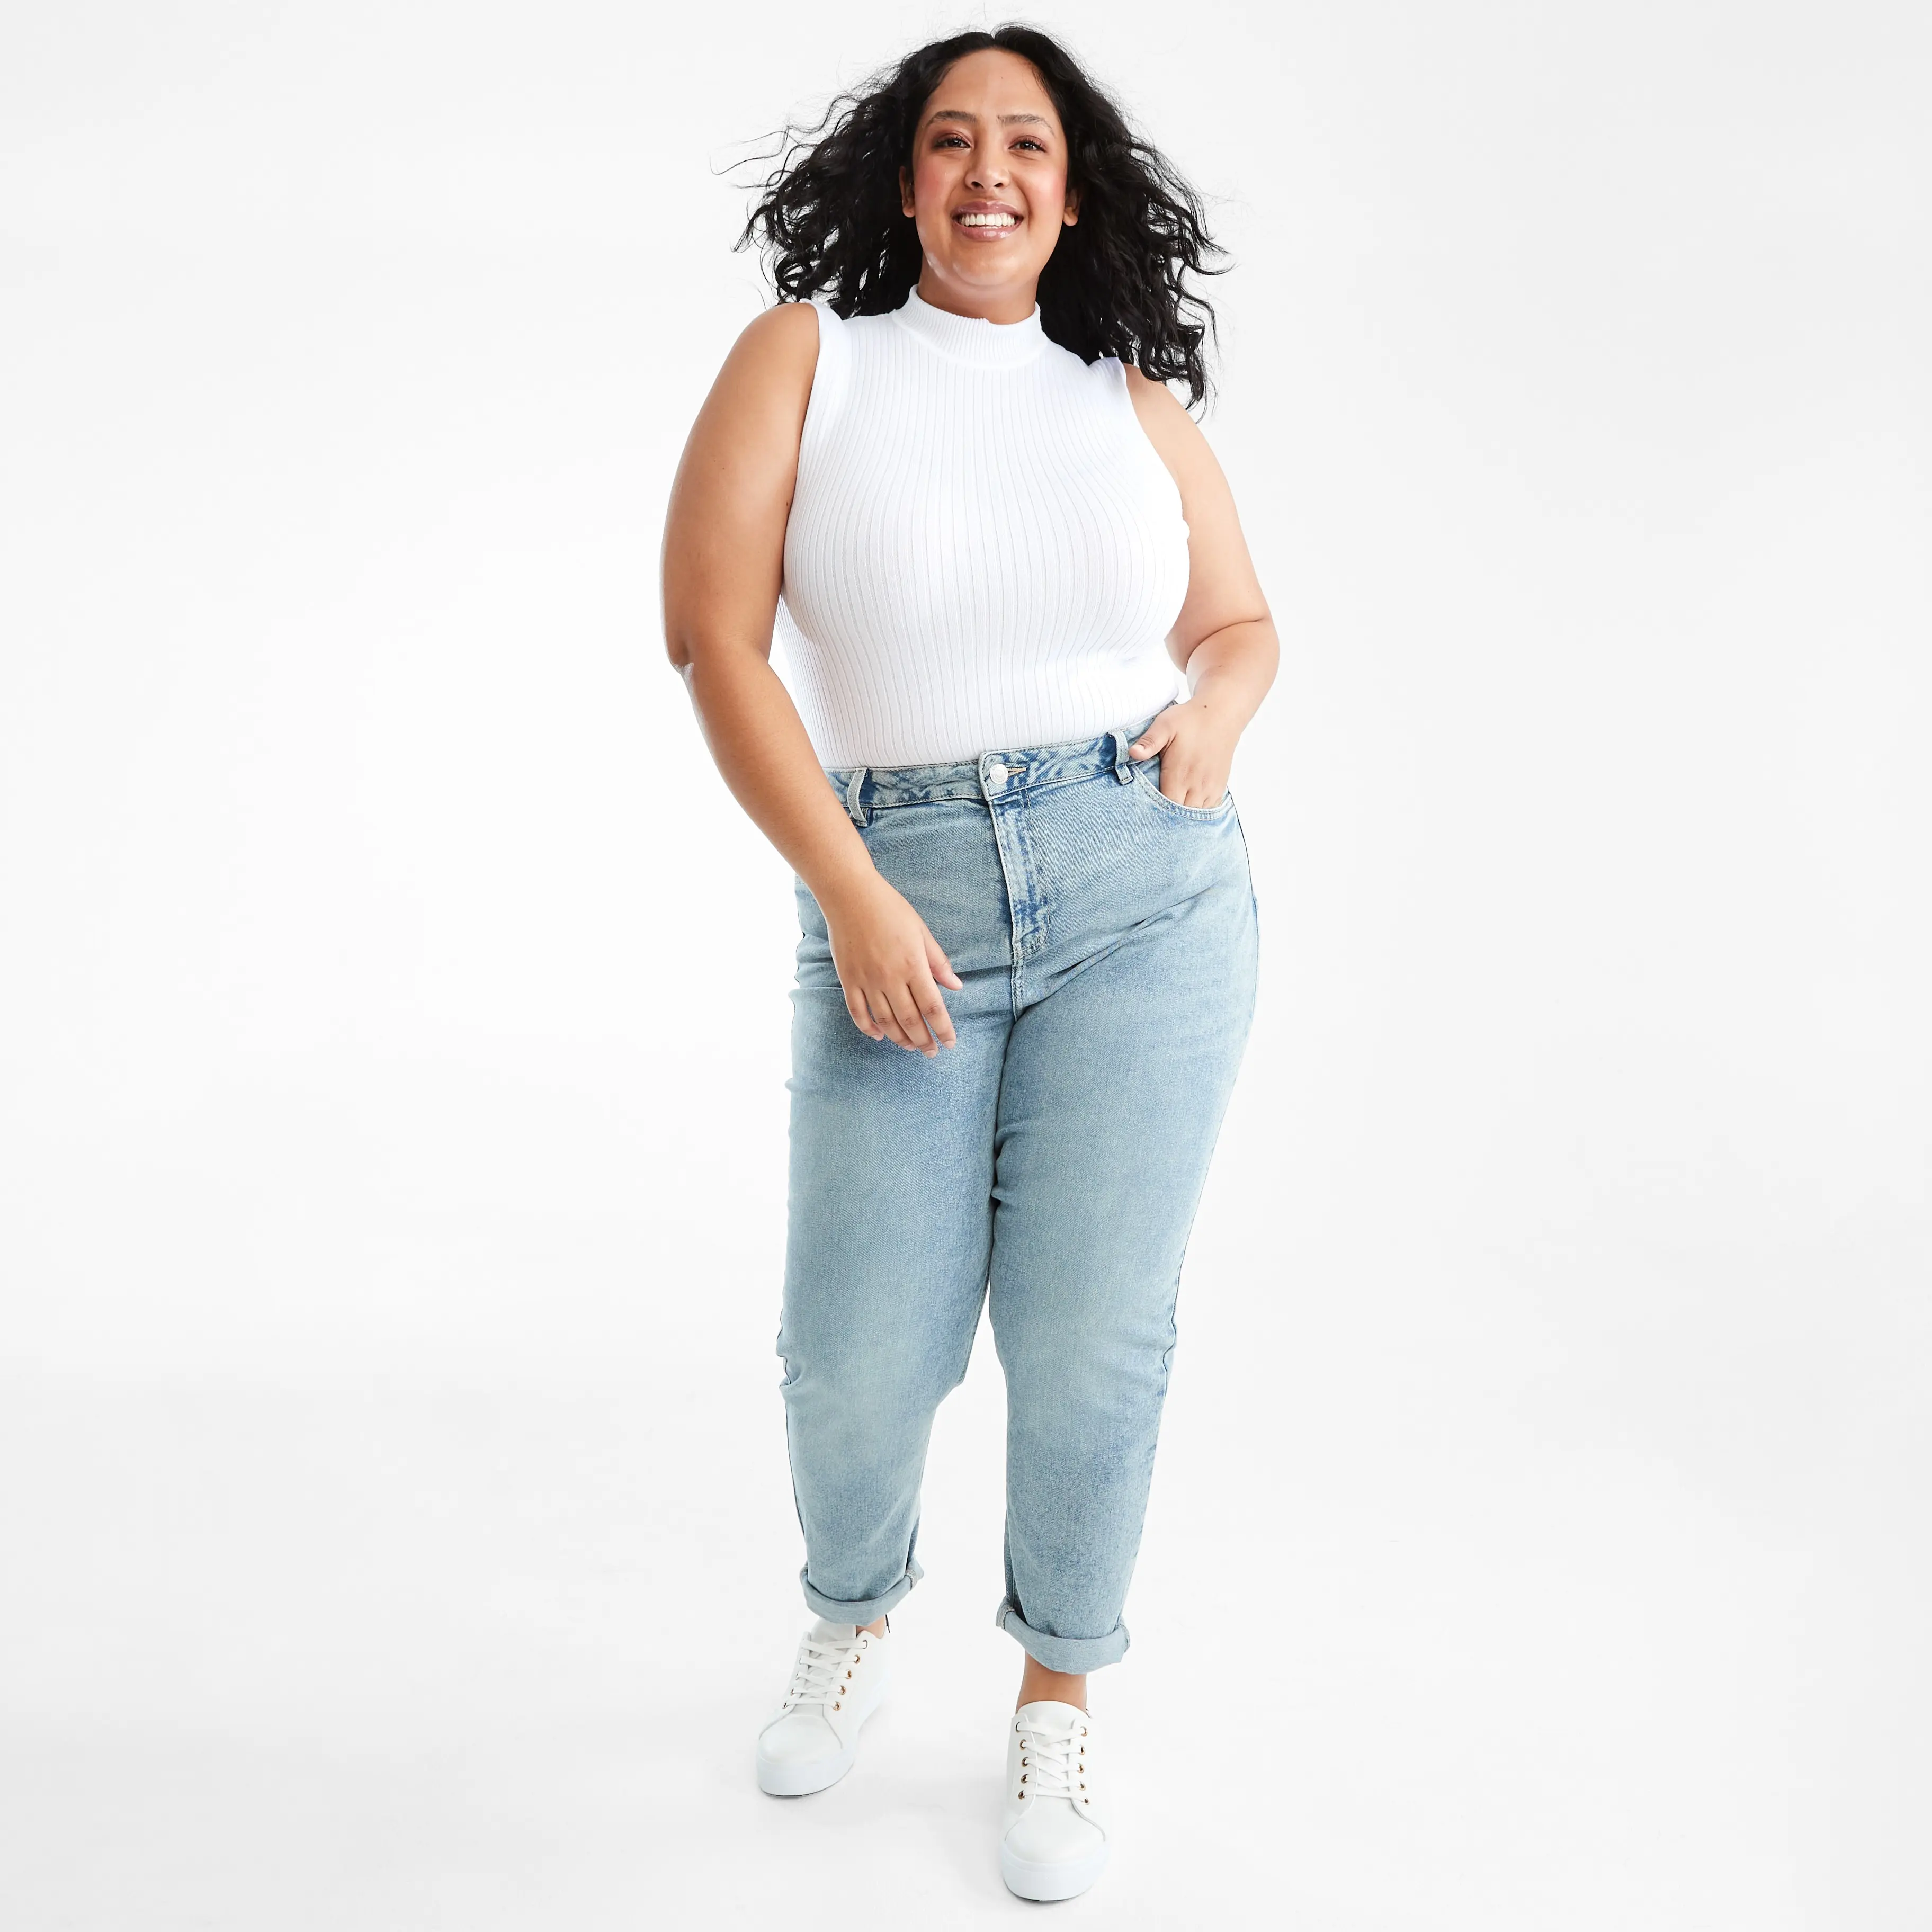 My outfit for weekend paint & sip + dancing. Top & Shoes Cotton on, Jeans  Kmart, I ripped up their mom jeans : r/PlusSizeFashion